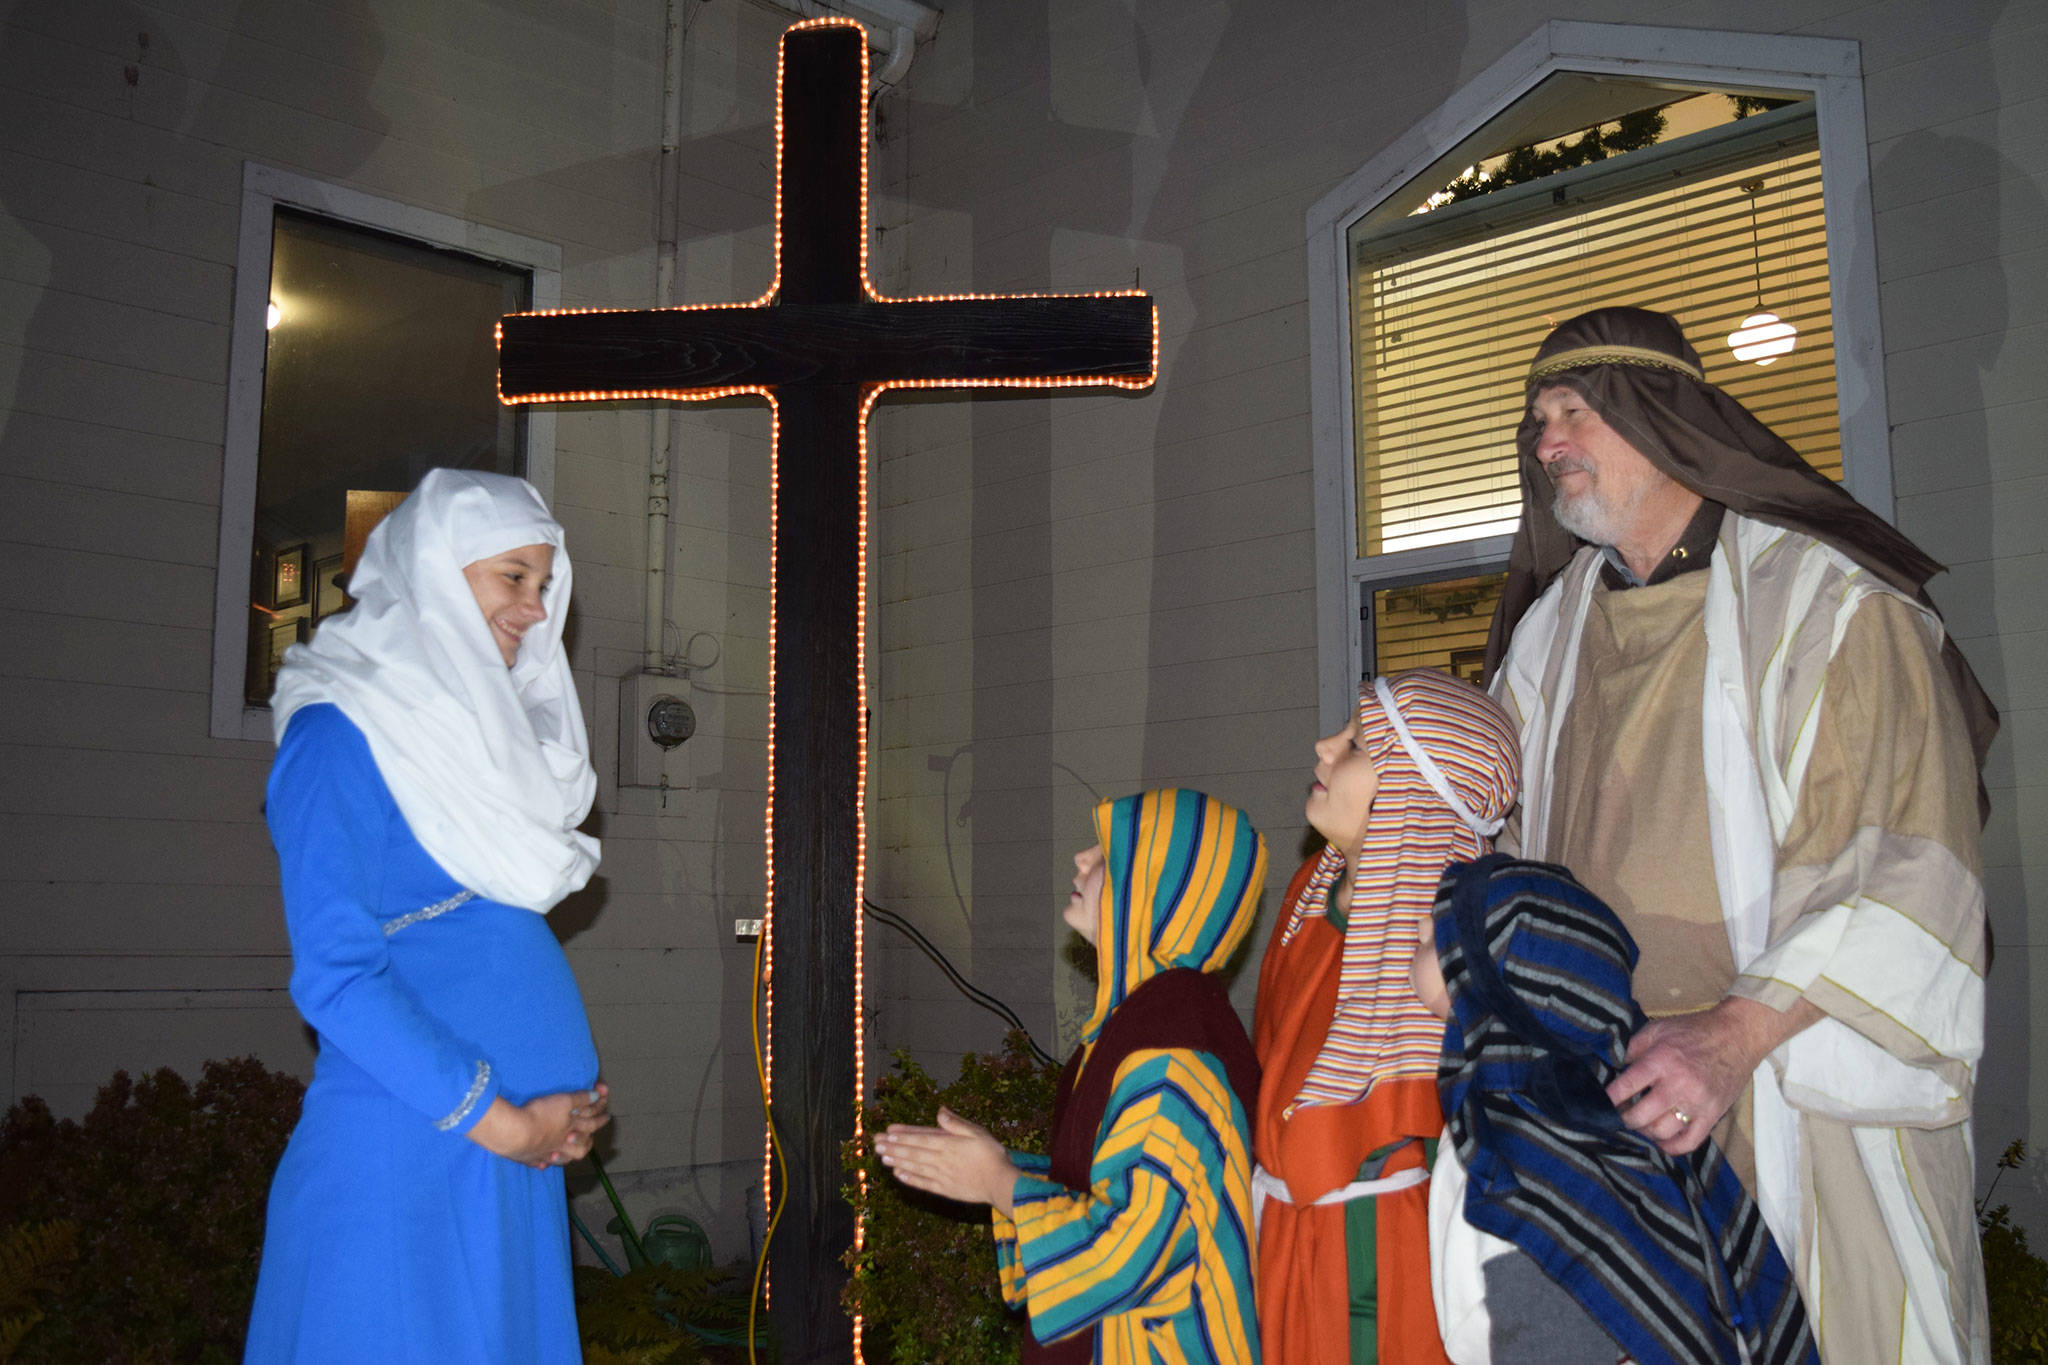 Members of the Sequim Valley Nazarene Church, from left, Melanie Byrne as Mary, with Marcus Byrne, Malachi Byrne, and Gabriel Robbins as shephards, and David Stoeckl, as Isaiah, rehearse for the Church’s living nativity with the first set of tours set for Saturday, Dec. 8 and continues on Saturday, Dec. 15. Sequim Gazette photo by Erin Hawkins